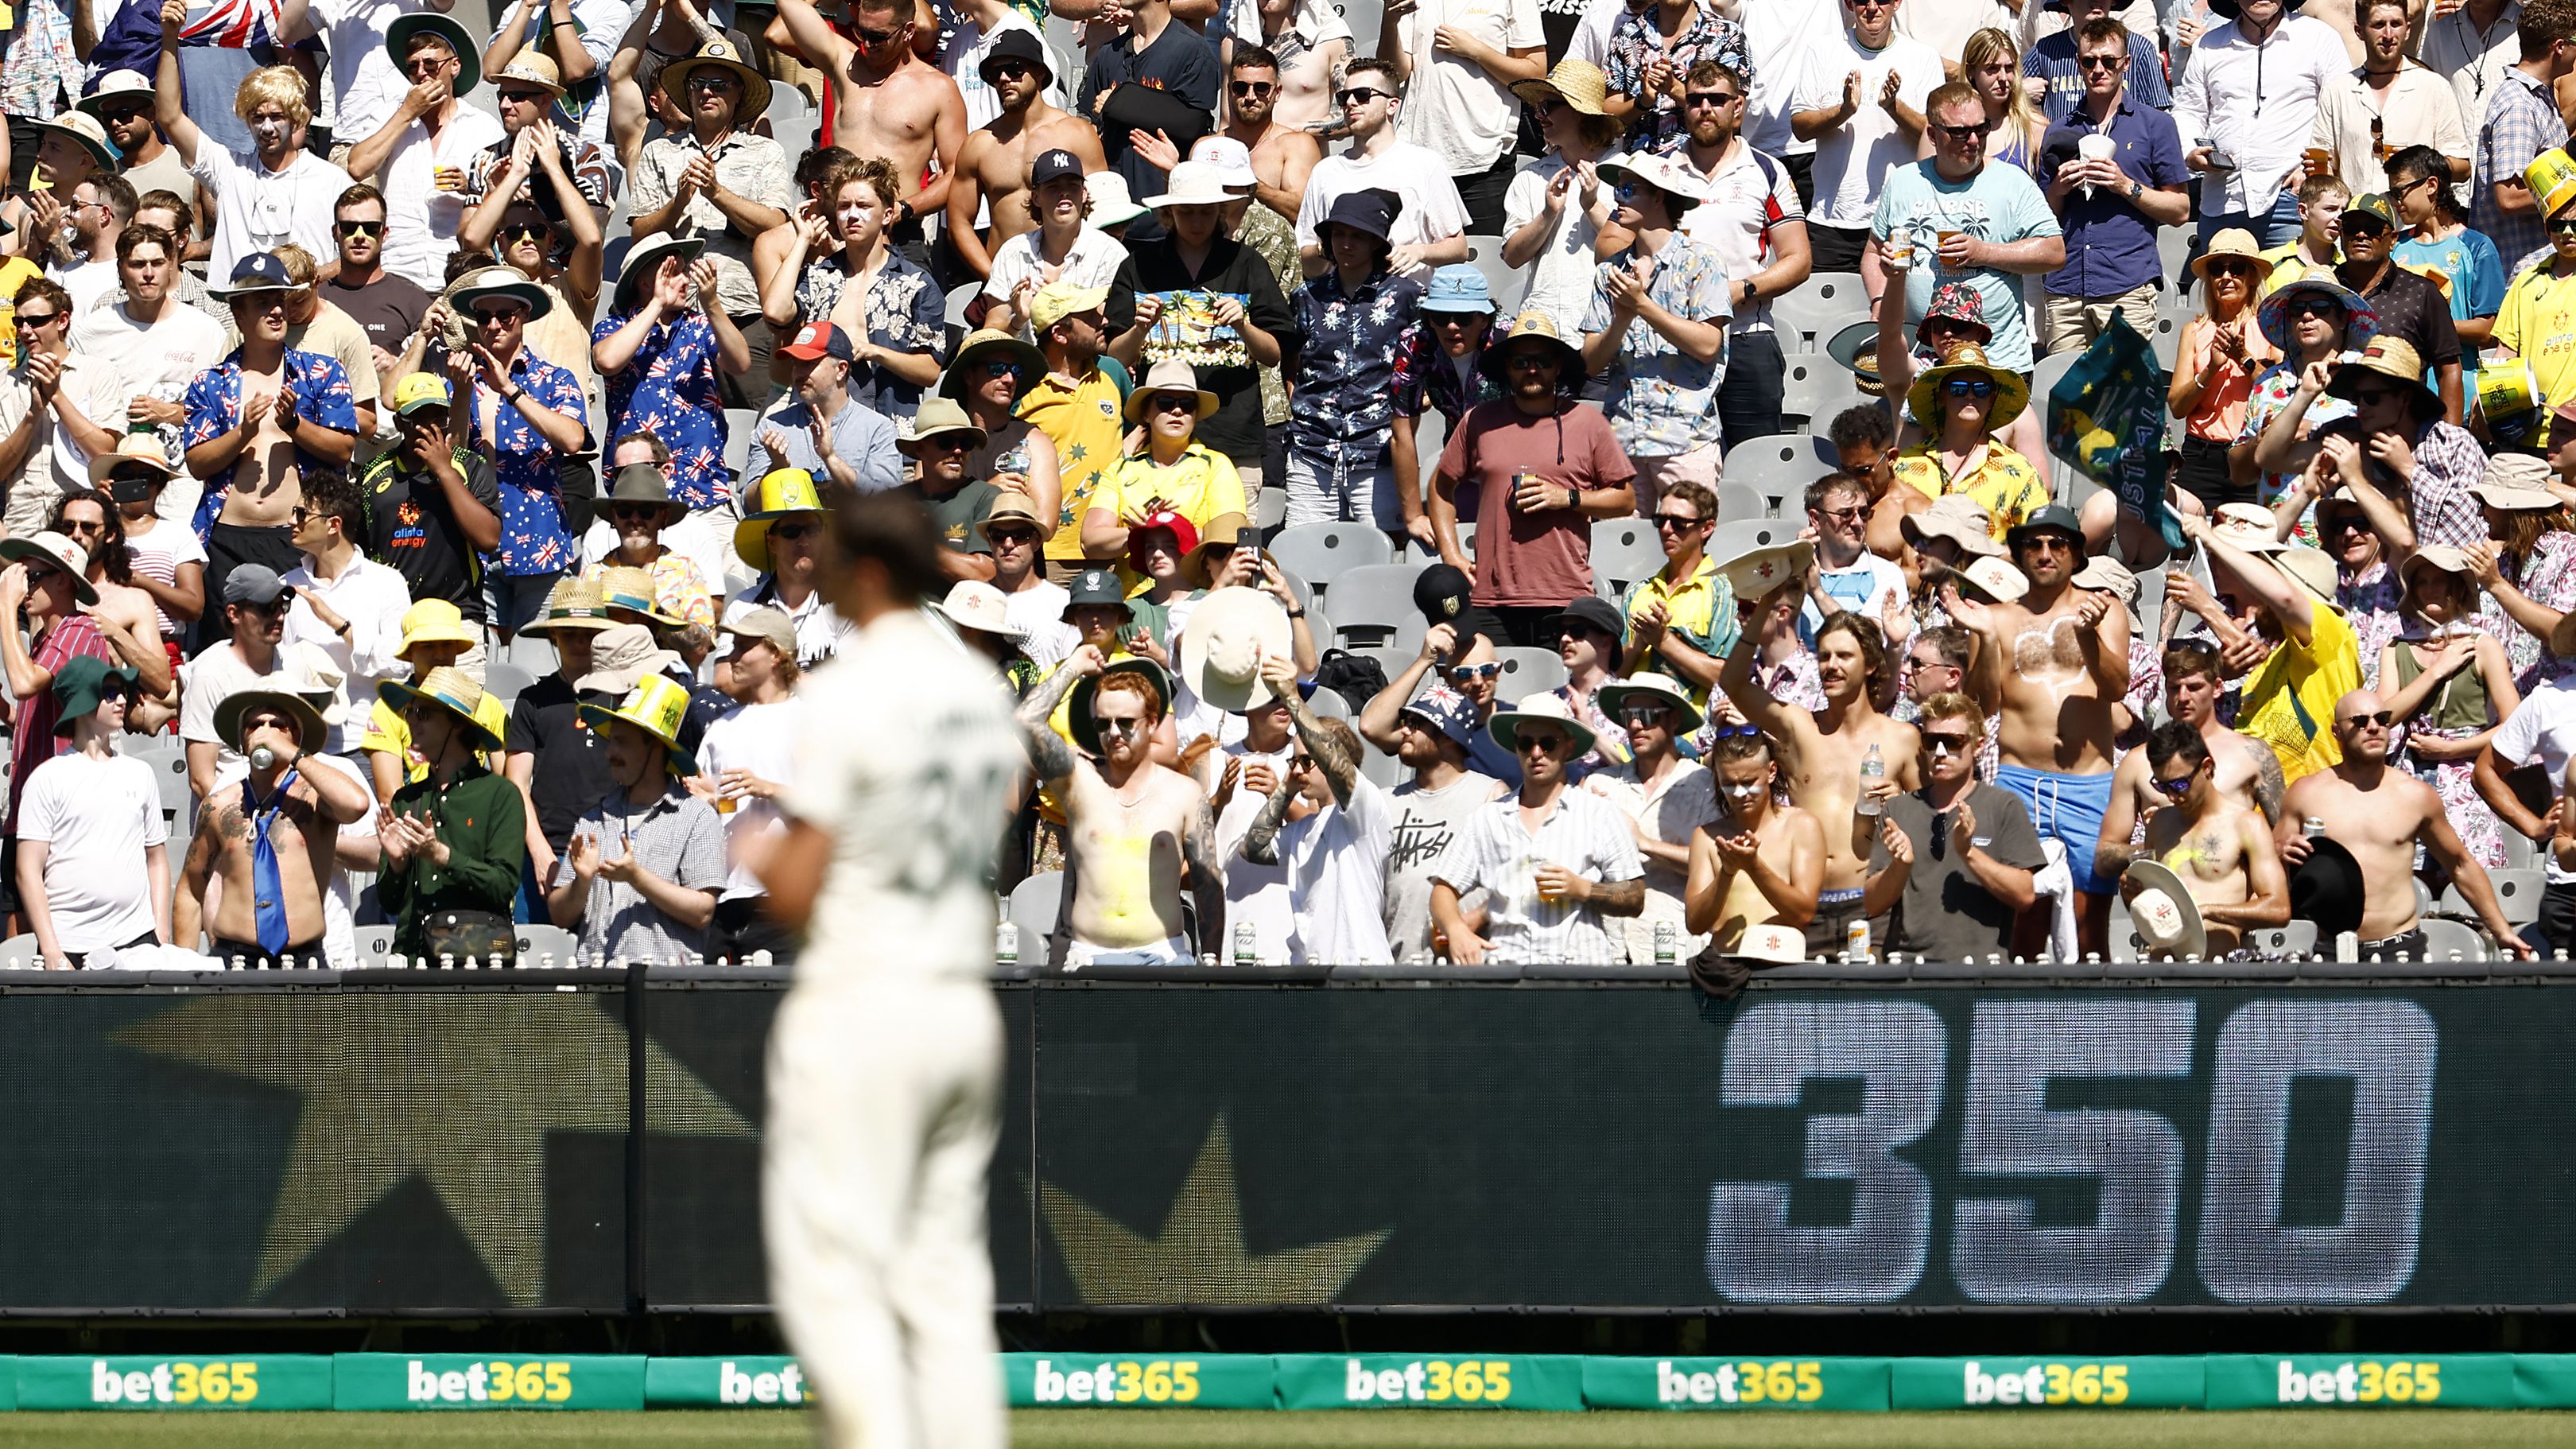 Spectators applaud in a tribute to Shane Warne during day one of the MCG Test. (Photo by Darrian Traynor/Getty Images)